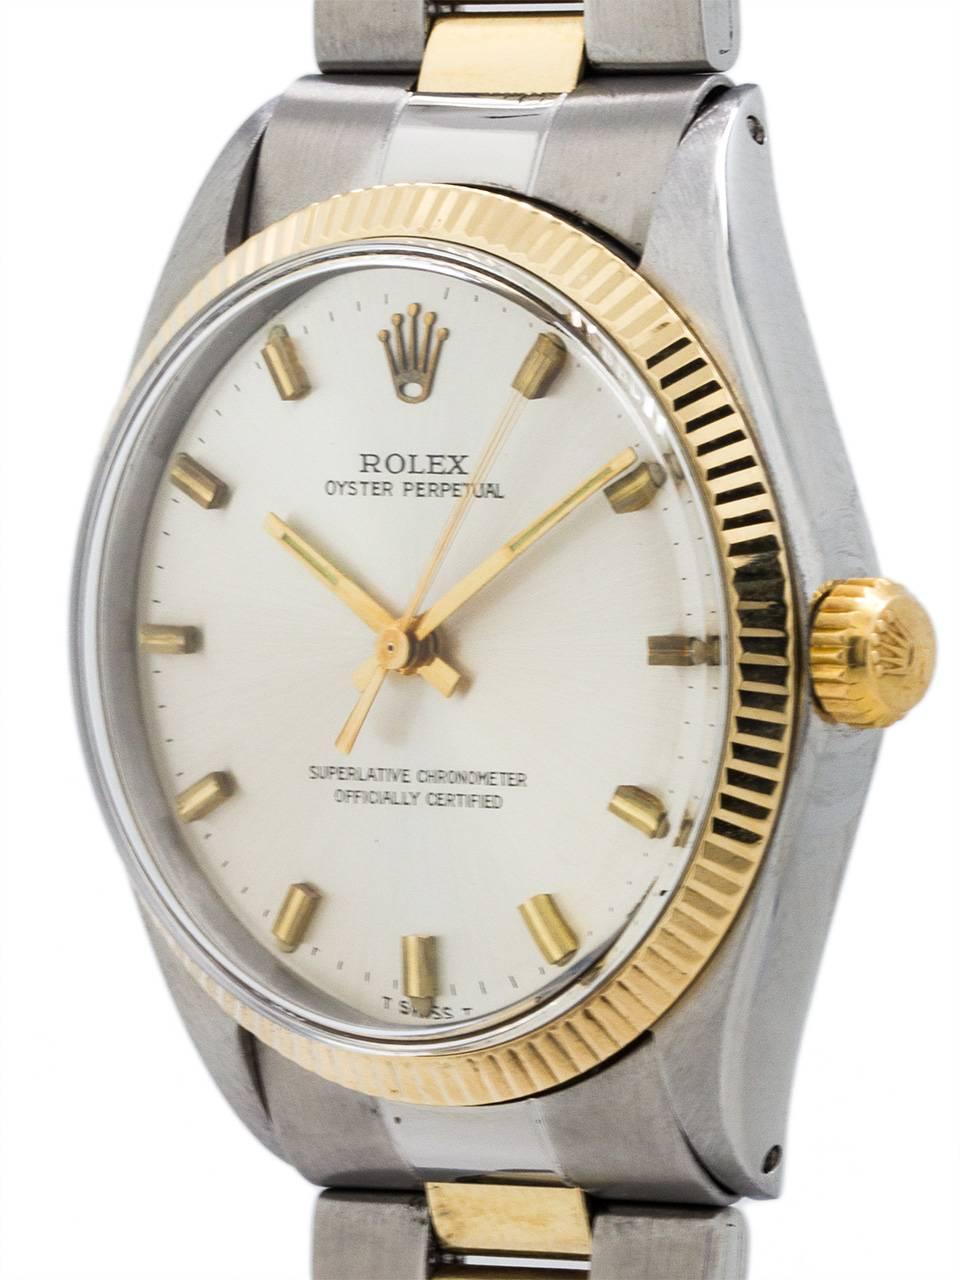 Rolex Stainless Steel and 14K yellow gold Oyster Perpetual ref 1005 serial #2.0 million circa 1971. Featuring 34mm diameter case with fine engine turned “milled” bezel and acrylic crystal. With original silvered satin dial with applied gold indexes